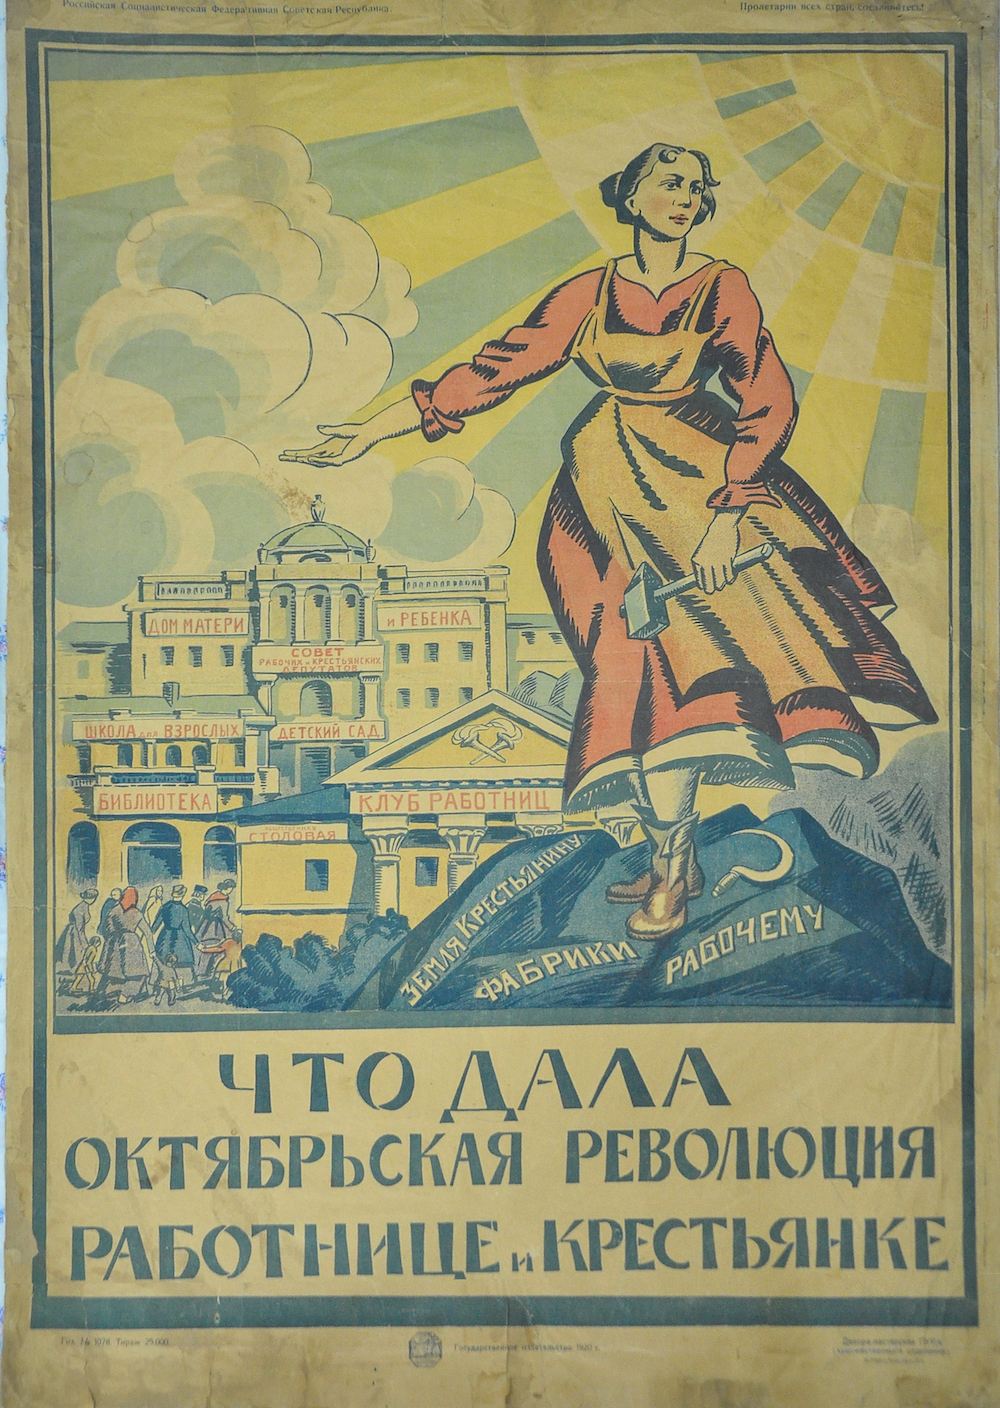 “What the October Revolution gave worker and peasant women: kindergartens, libraries, schools for adults, canteens etc” 